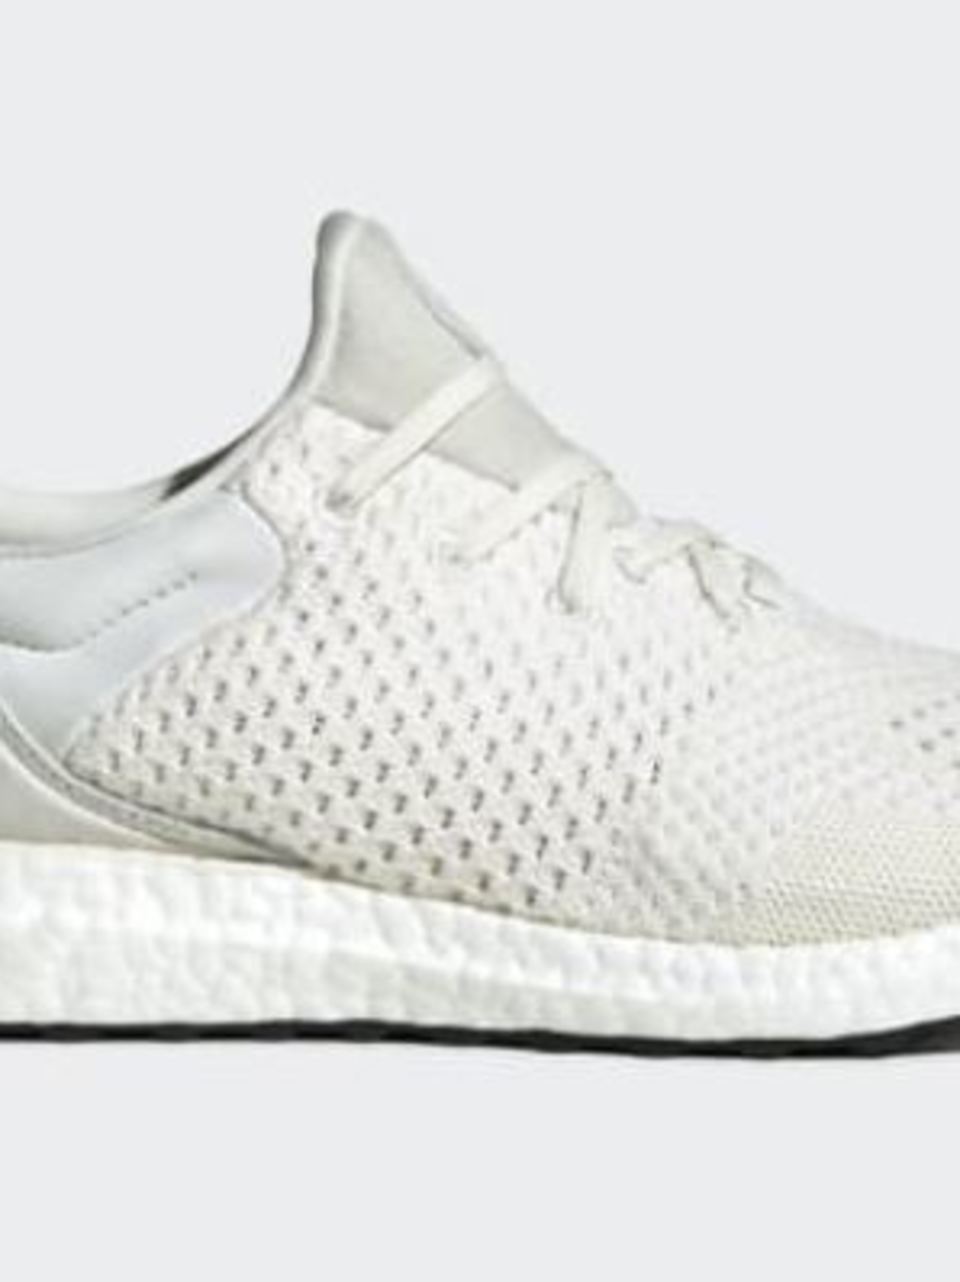 adidas pulls all white sneaker